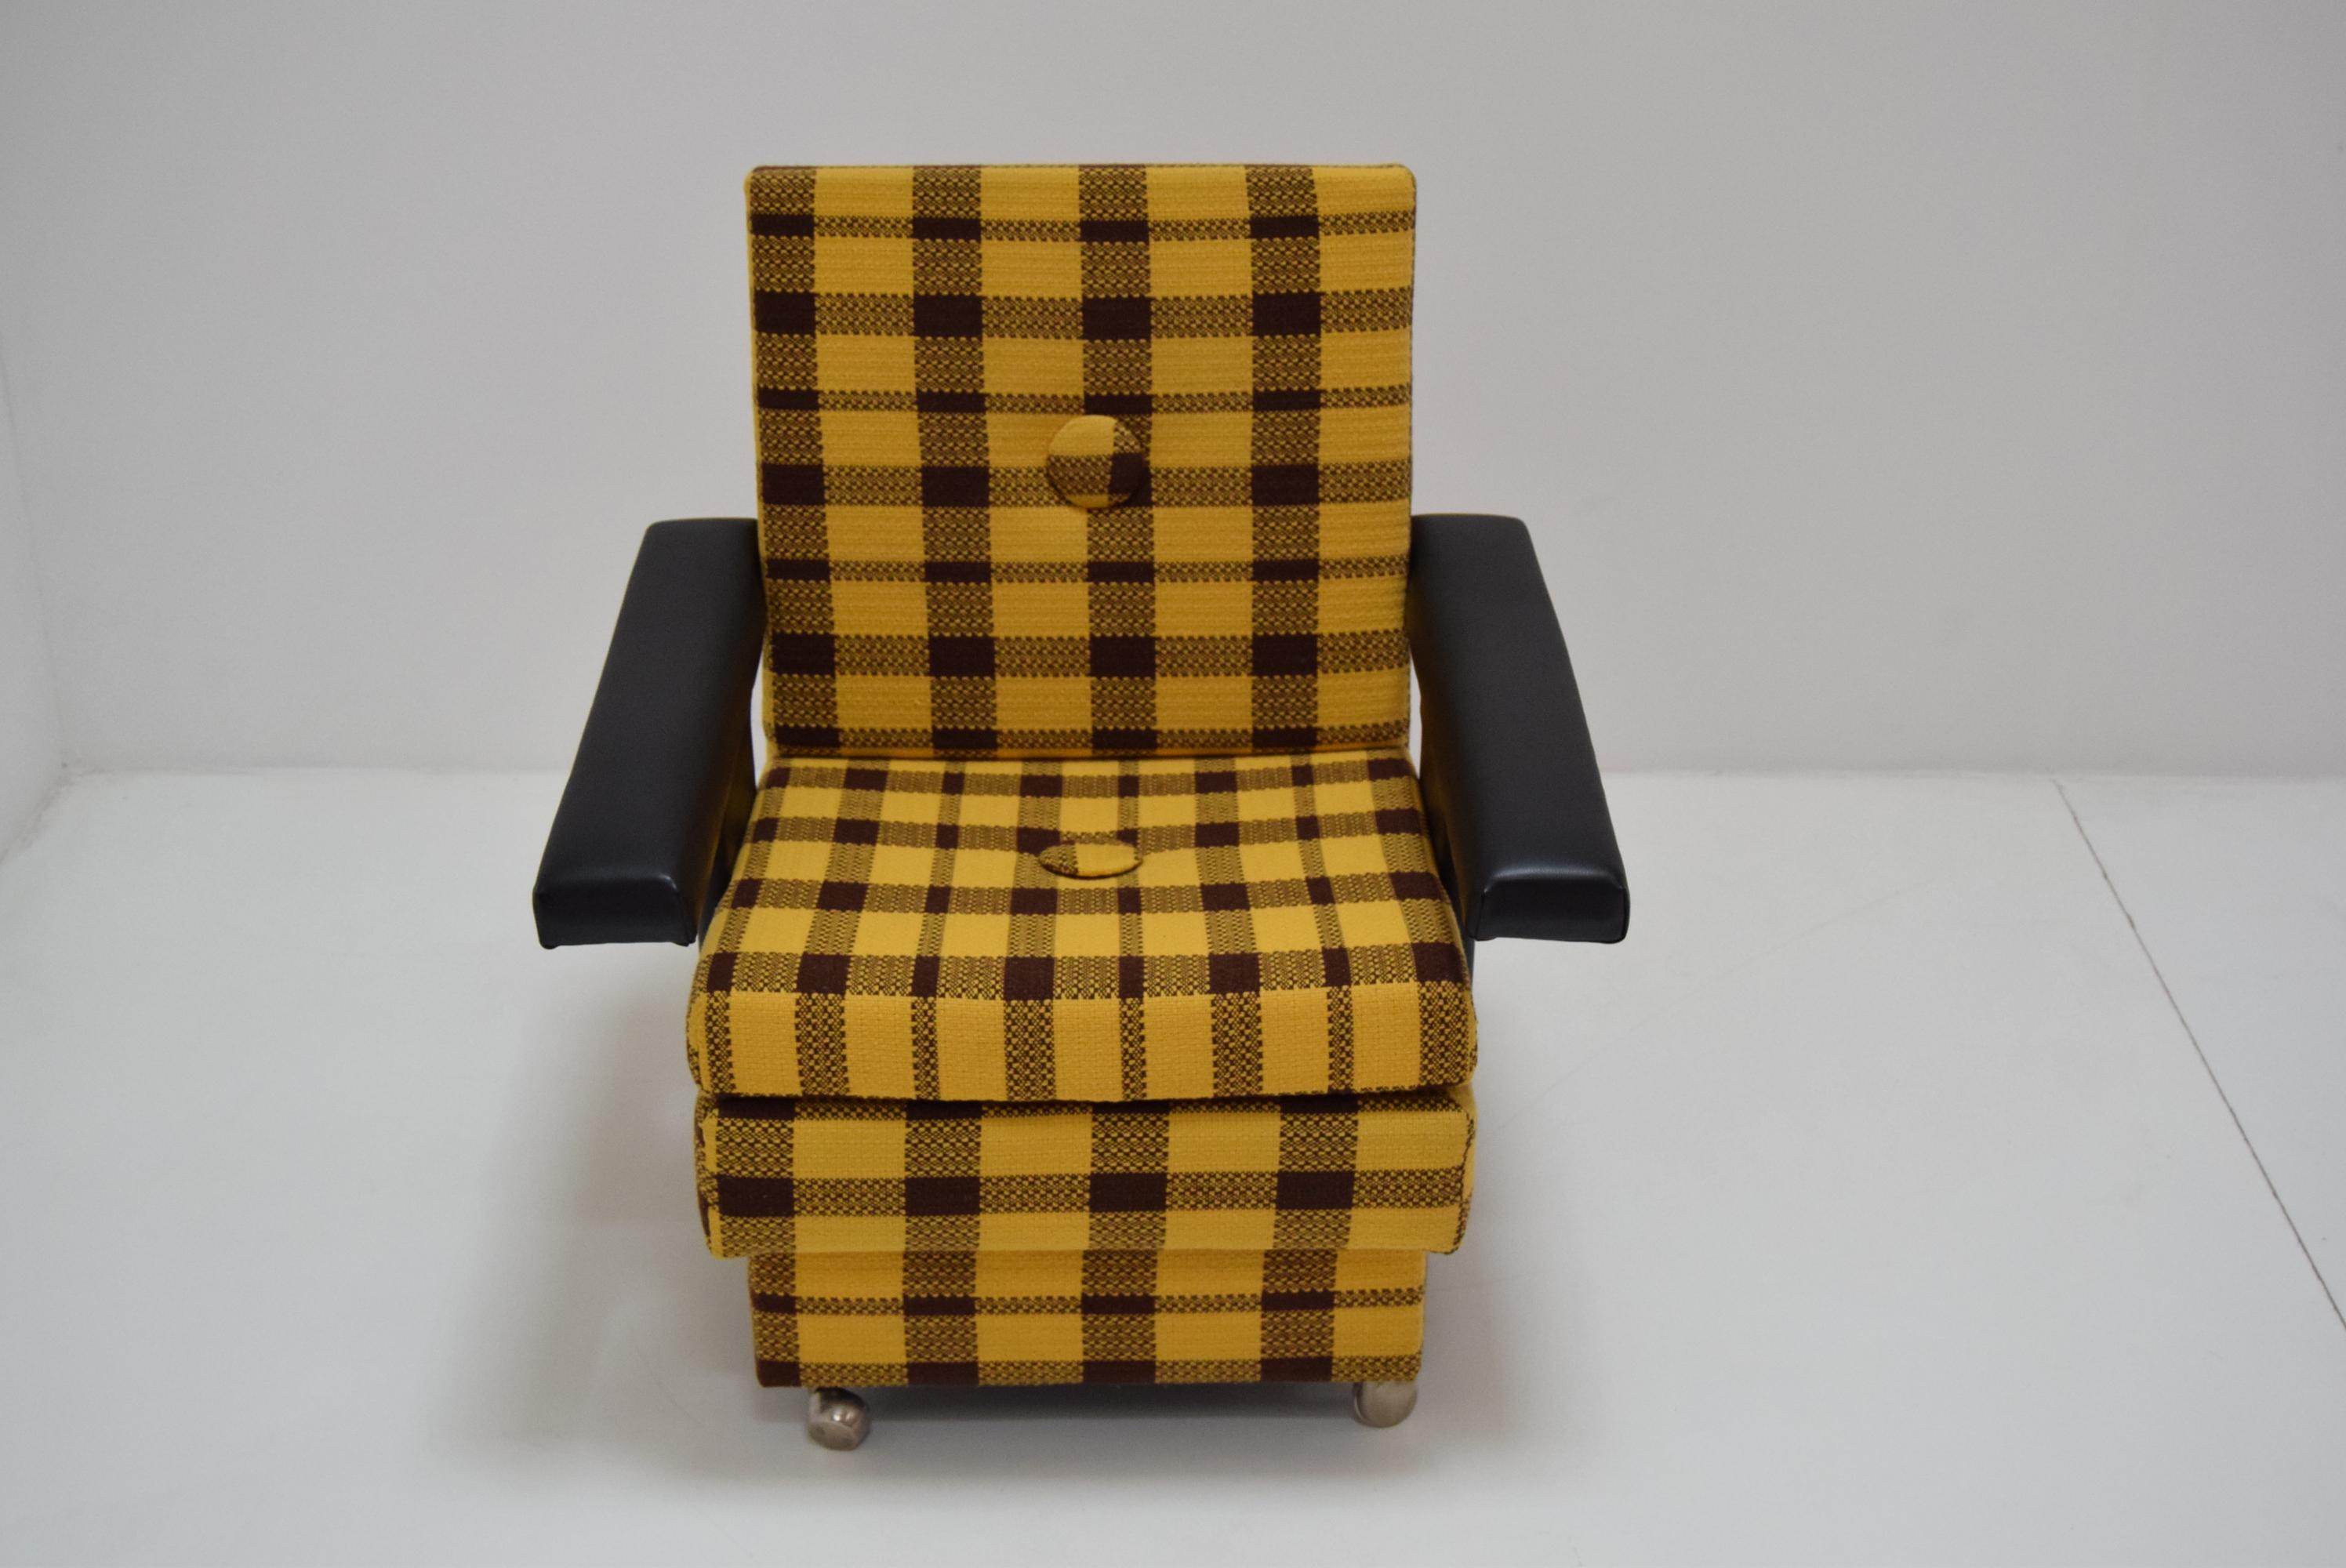 Midcentury Design Armchair, with Wheels, 1970s In Good Condition For Sale In Praha, CZ